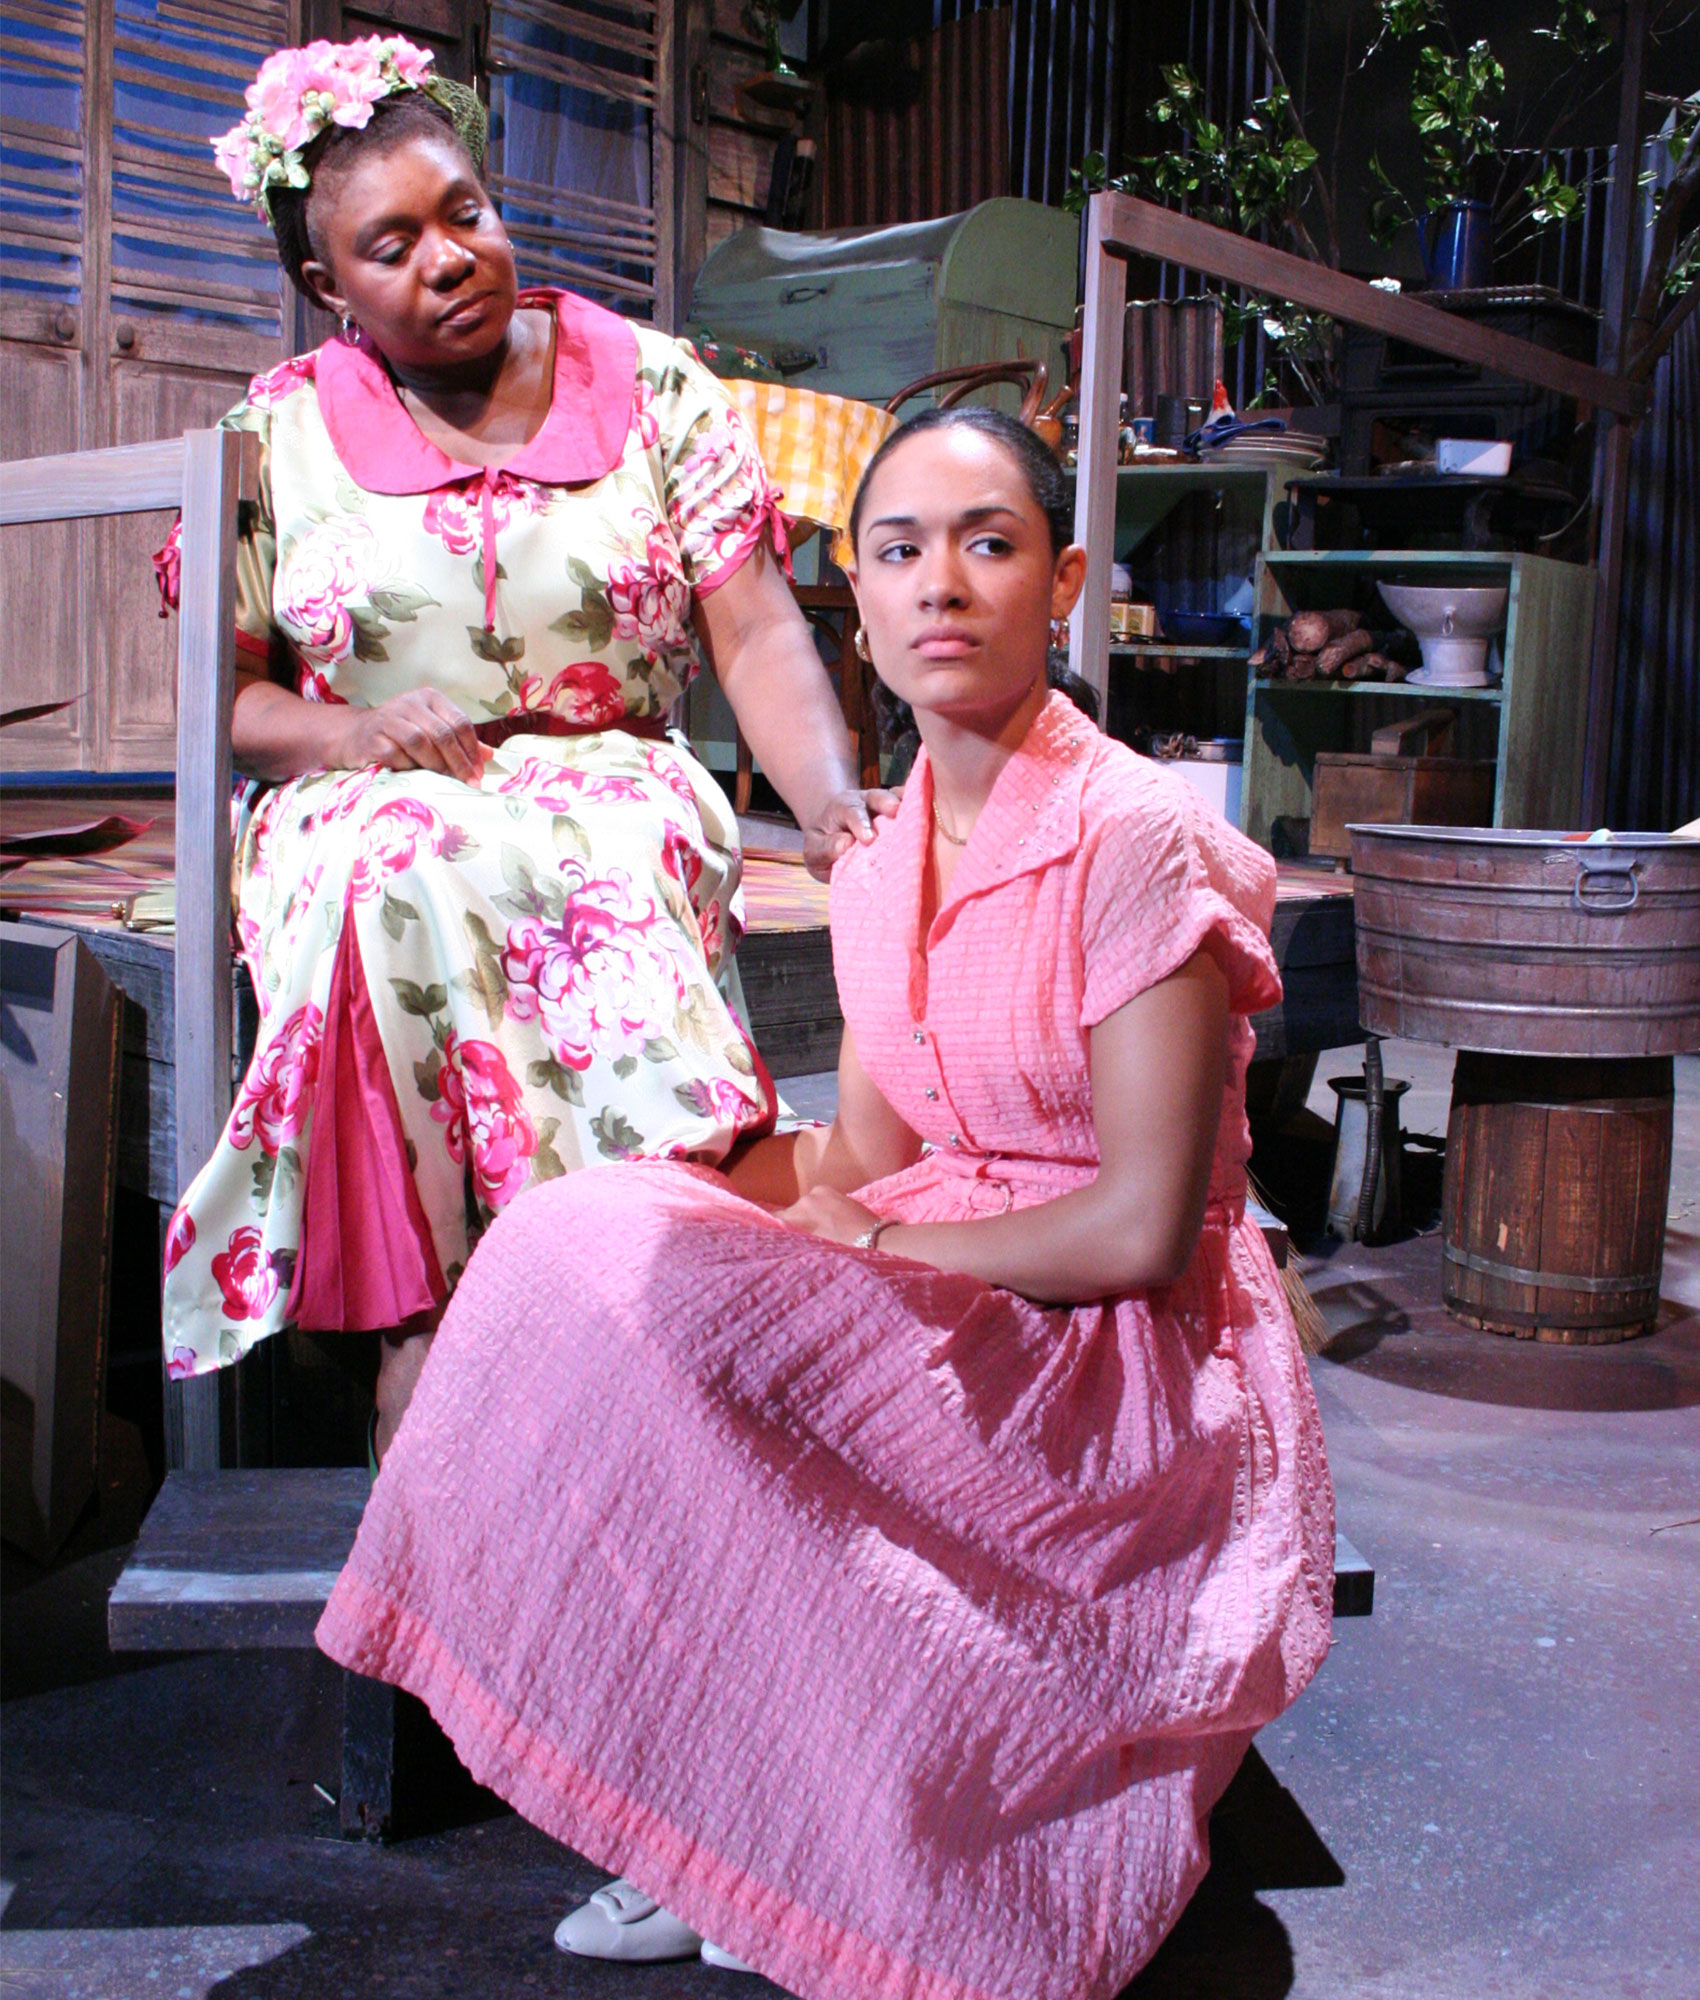 Two women sit together on porch steps. The older woman of the pair looks down at the younger woman as she sits on the step above the young woman. The older woman has one hand resting on the young woman’s shoulder while she has the other resting in her lap. The young woman sits upright and looks sadly down and outward toward stage left. 